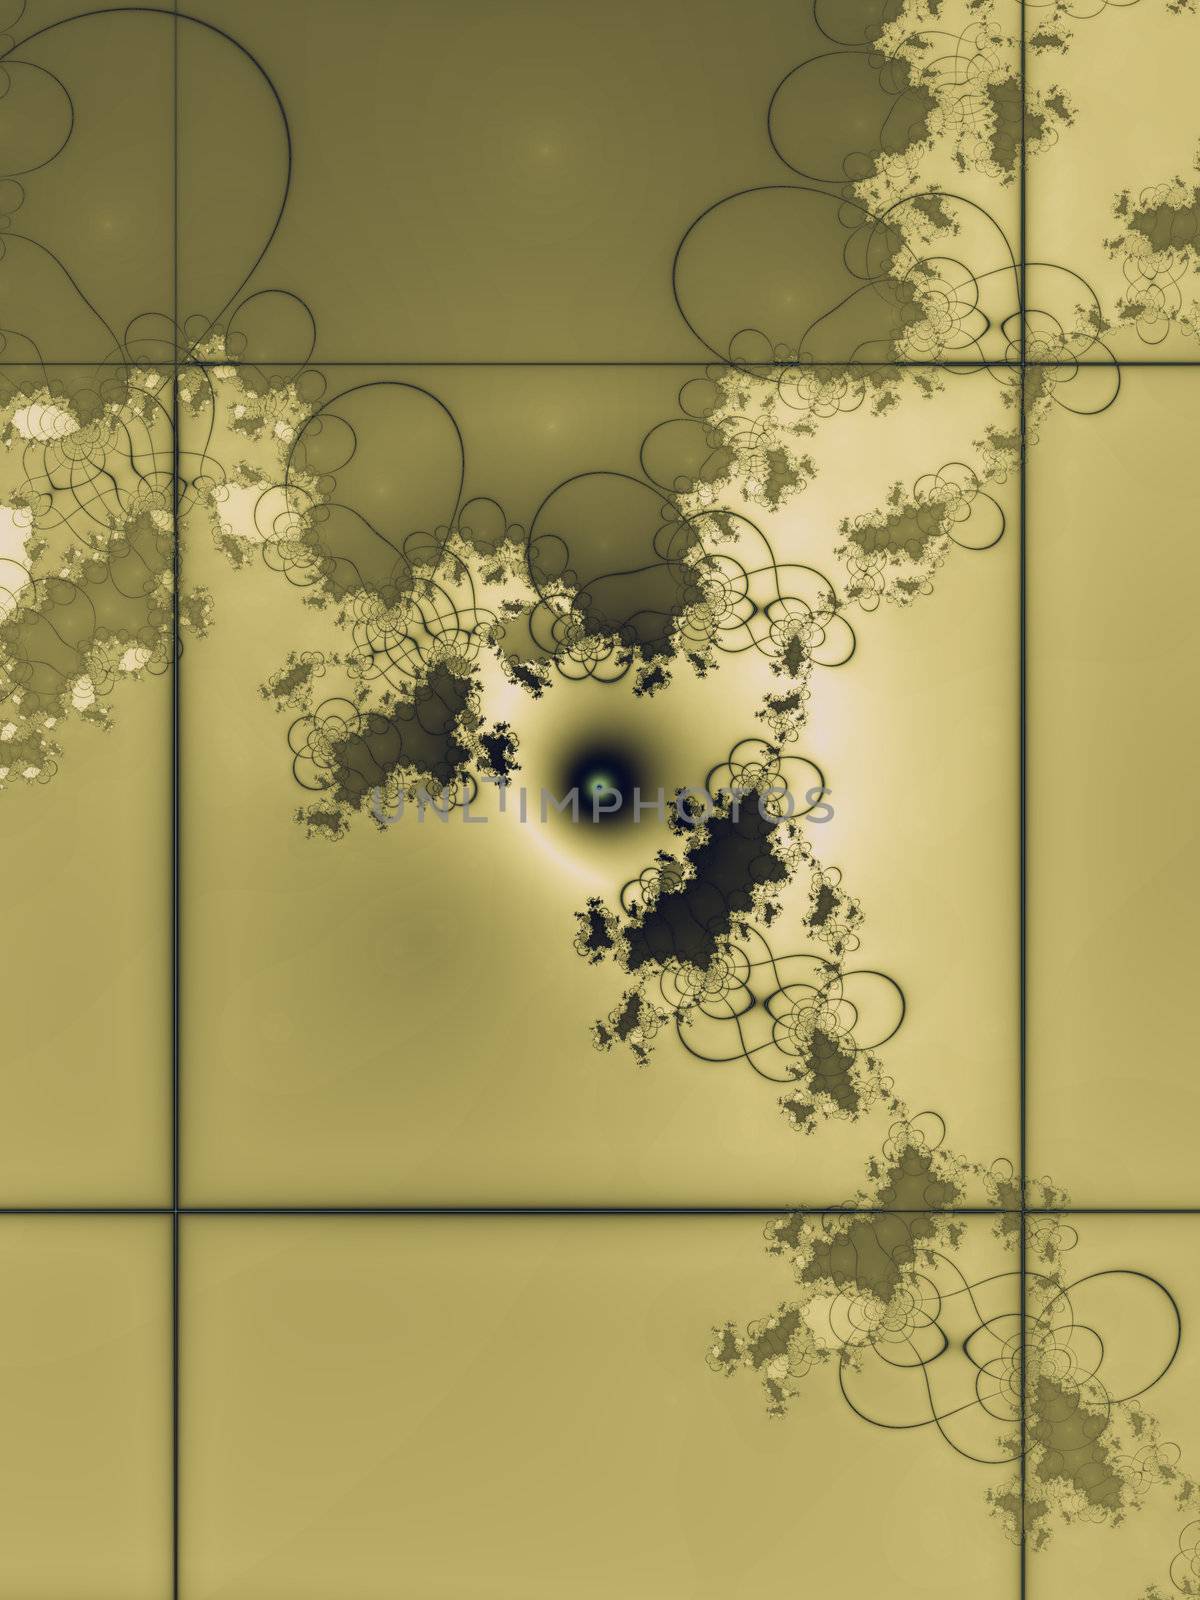 An illustration of a nice abstract fractal graphic background